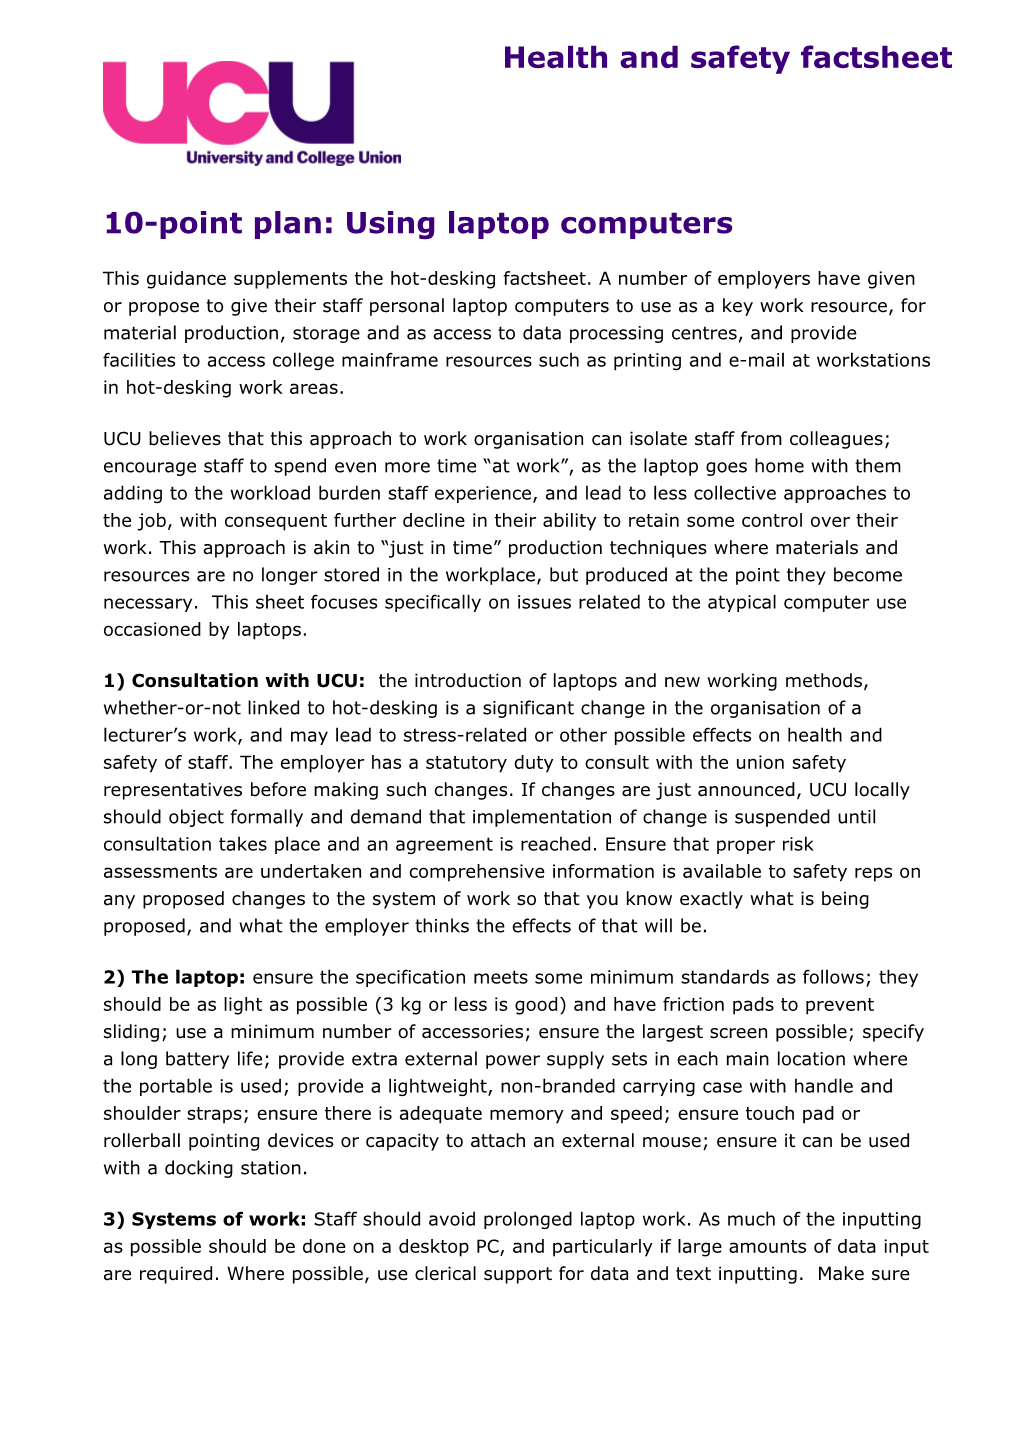 10-Point Plan: Using Laptop Computers